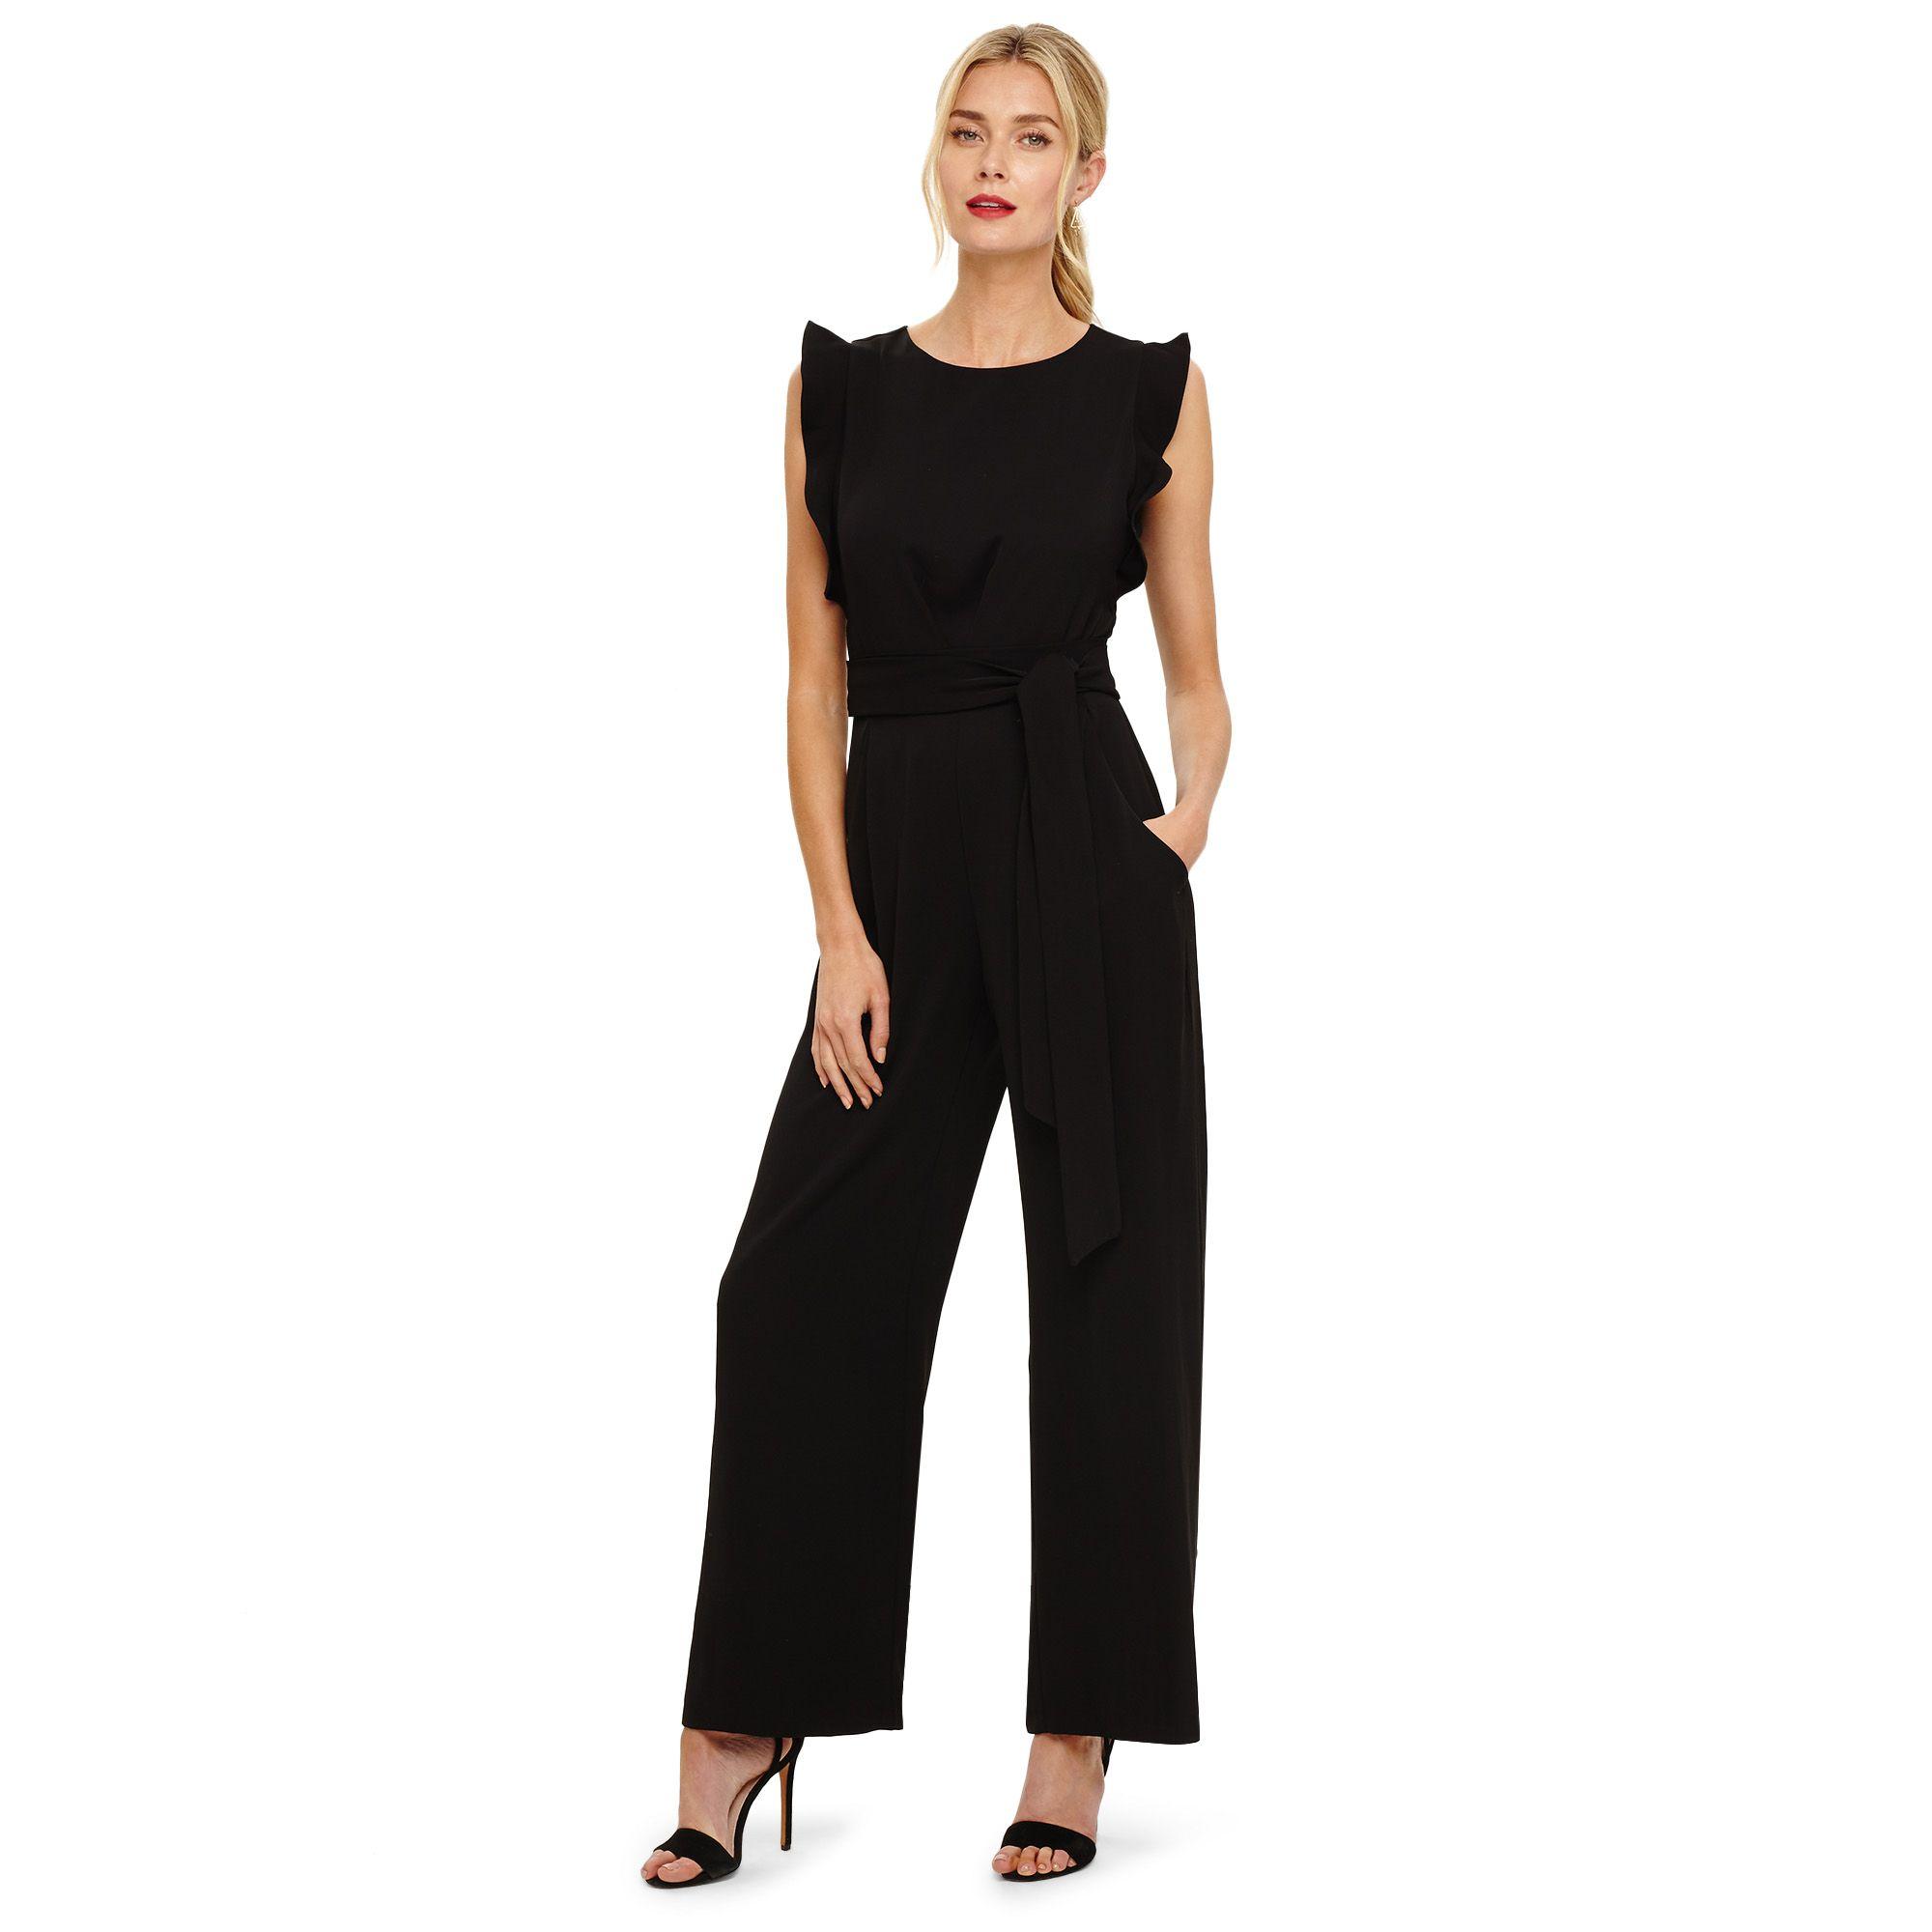 Phase Eight Victoriana Jumpsuit in Black - Lyst